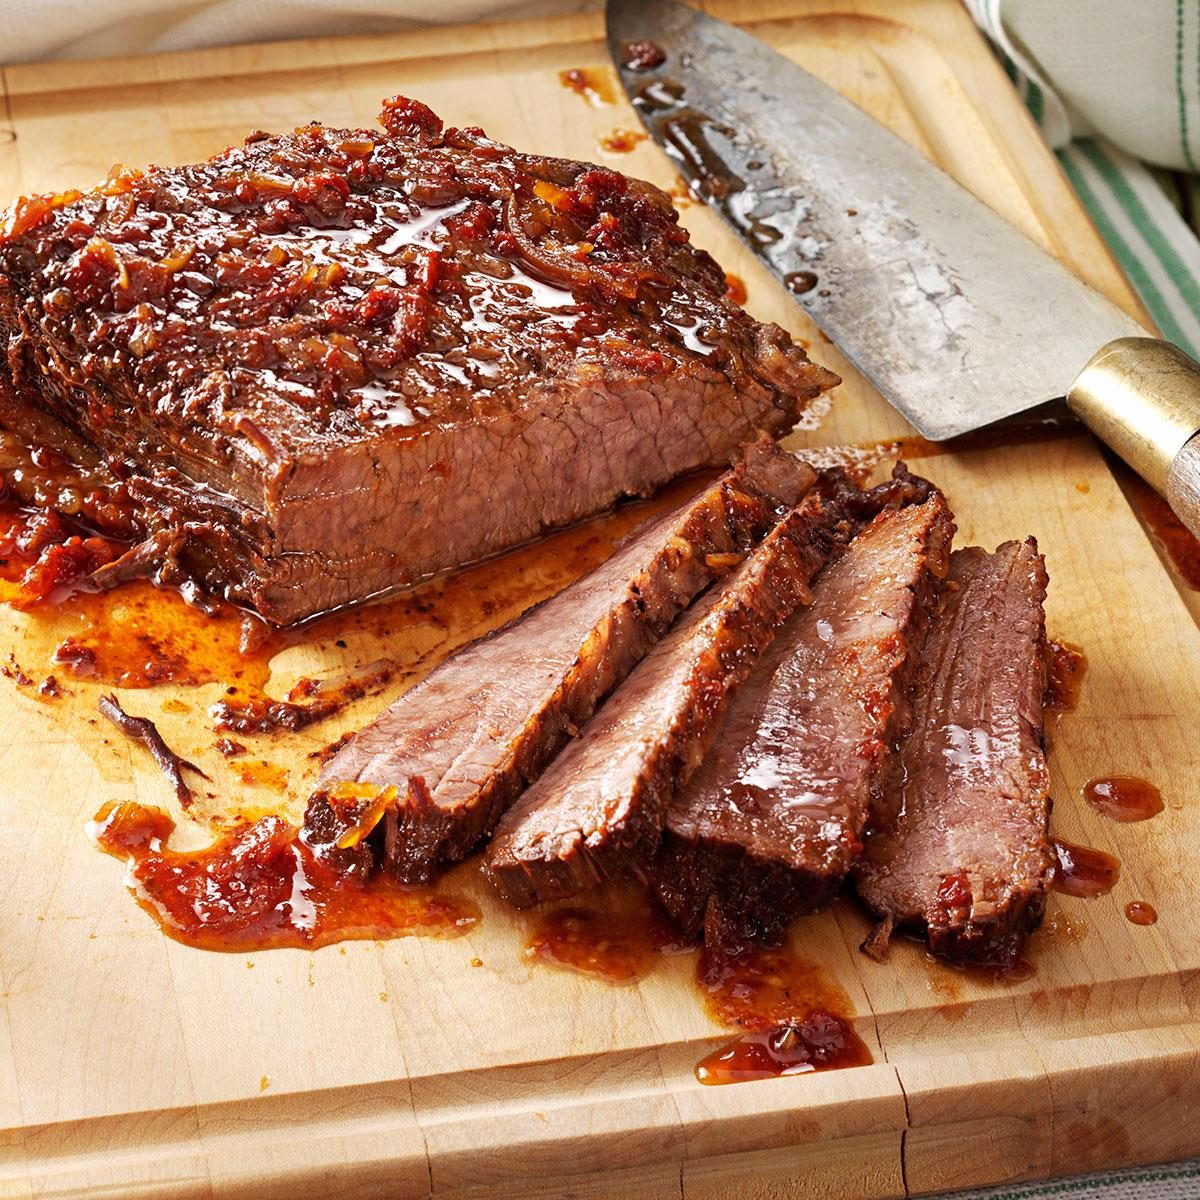 https://www.tasteofhome.com/wp-content/uploads/2018/01/Sweet-and-Savory-Brisket_exps15367_RDS2447884C09_14_4bC_RMS-1.jpg?fit=700%2C1024